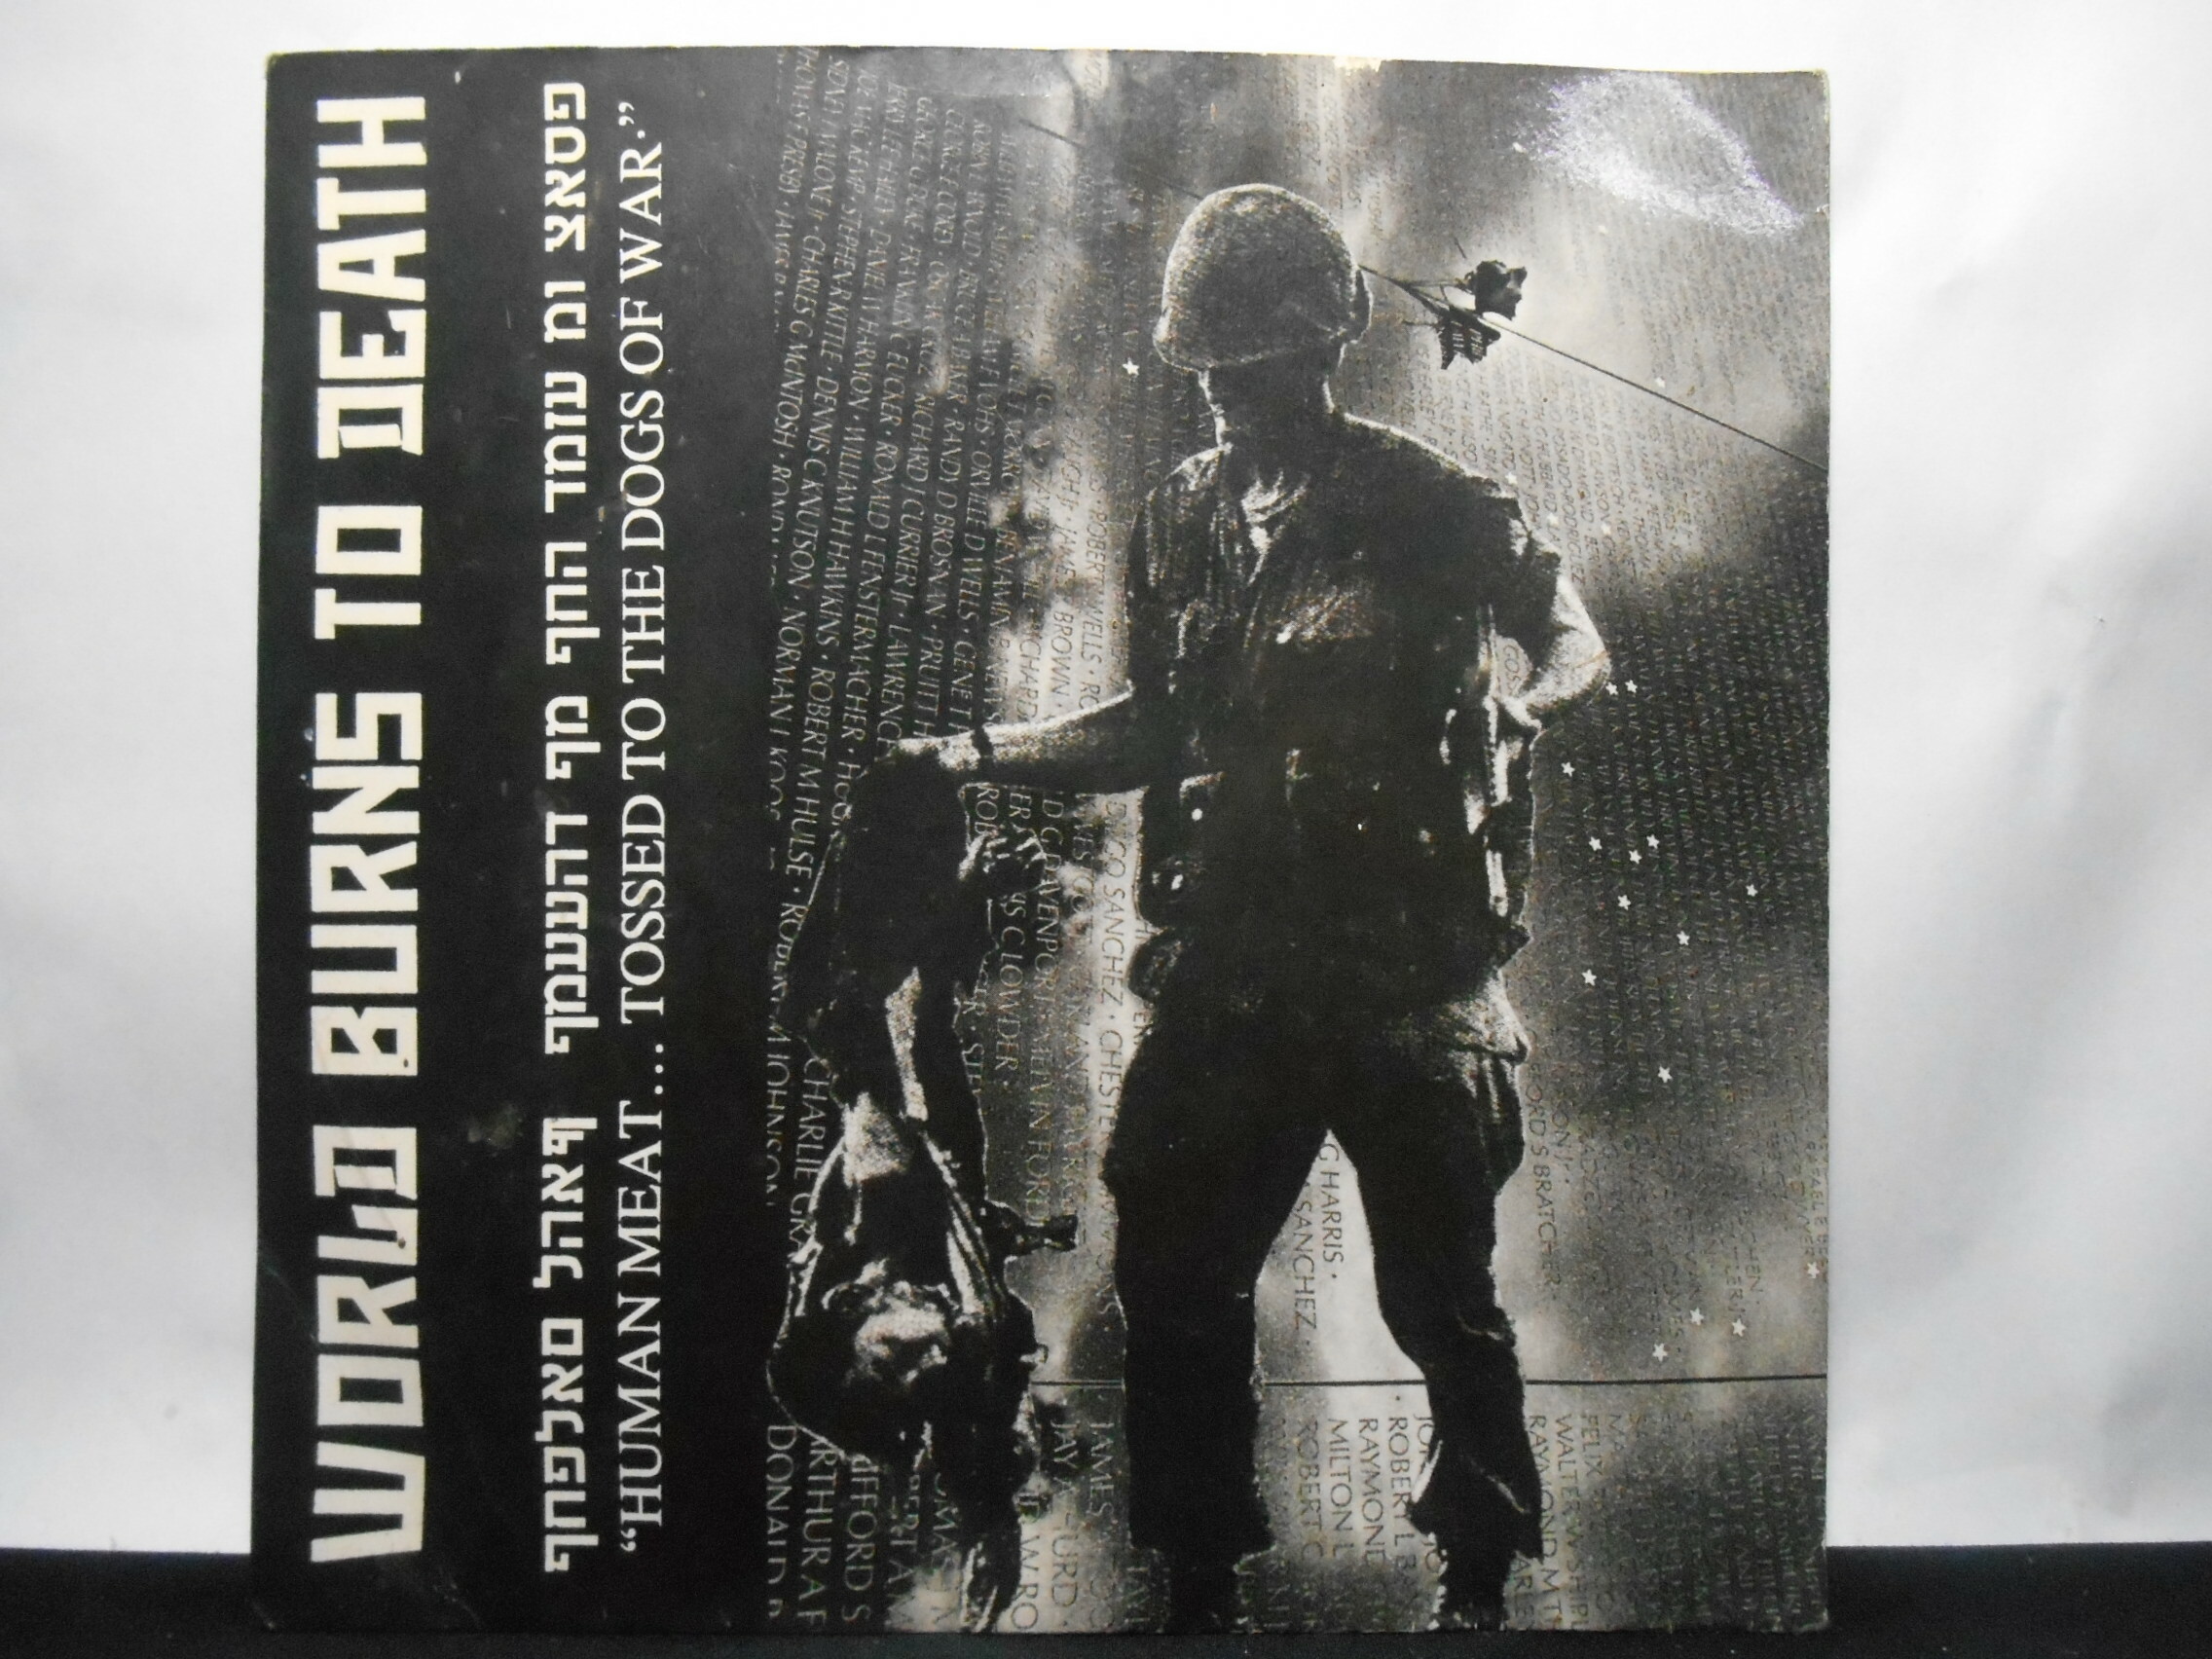 Vinil Compacto - World Burns To Death &#8206;- Human Meat Tossed To The Dogs Of War (USA/Clear)